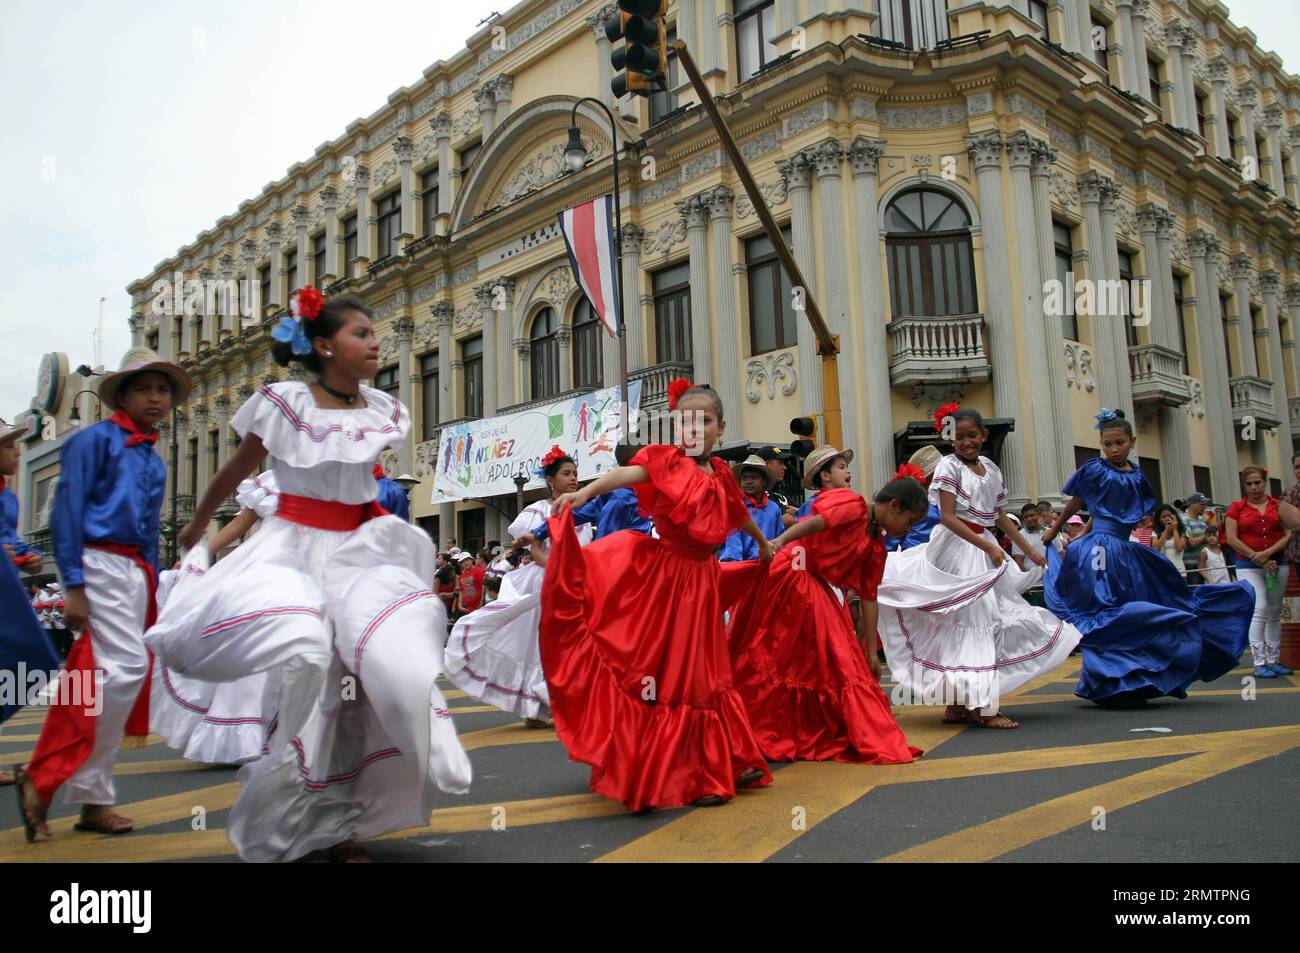 Students take part in a parade to commemorate the 193rd anniversary of Costa Rican Independence Day, in San Jose, capital of Costa Rica, on Sept. 15, 2014. Kent Gilbert) (vf) (sp) COSTA RICA-SAN JOSE-SOCIETY-INDEPENDENCE DAY e KENTxGILBERT PUBLICATIONxNOTxINxCHN   Students Take Part in a Parade to commemorate The 193rd Anniversary of Costa Rican Independence Day in San Jose Capital of Costa Rica ON Sept 15 2014 Kent Gilbert VF SP Costa Rica San Jose Society Independence Day e  PUBLICATIONxNOTxINxCHN Stock Photo